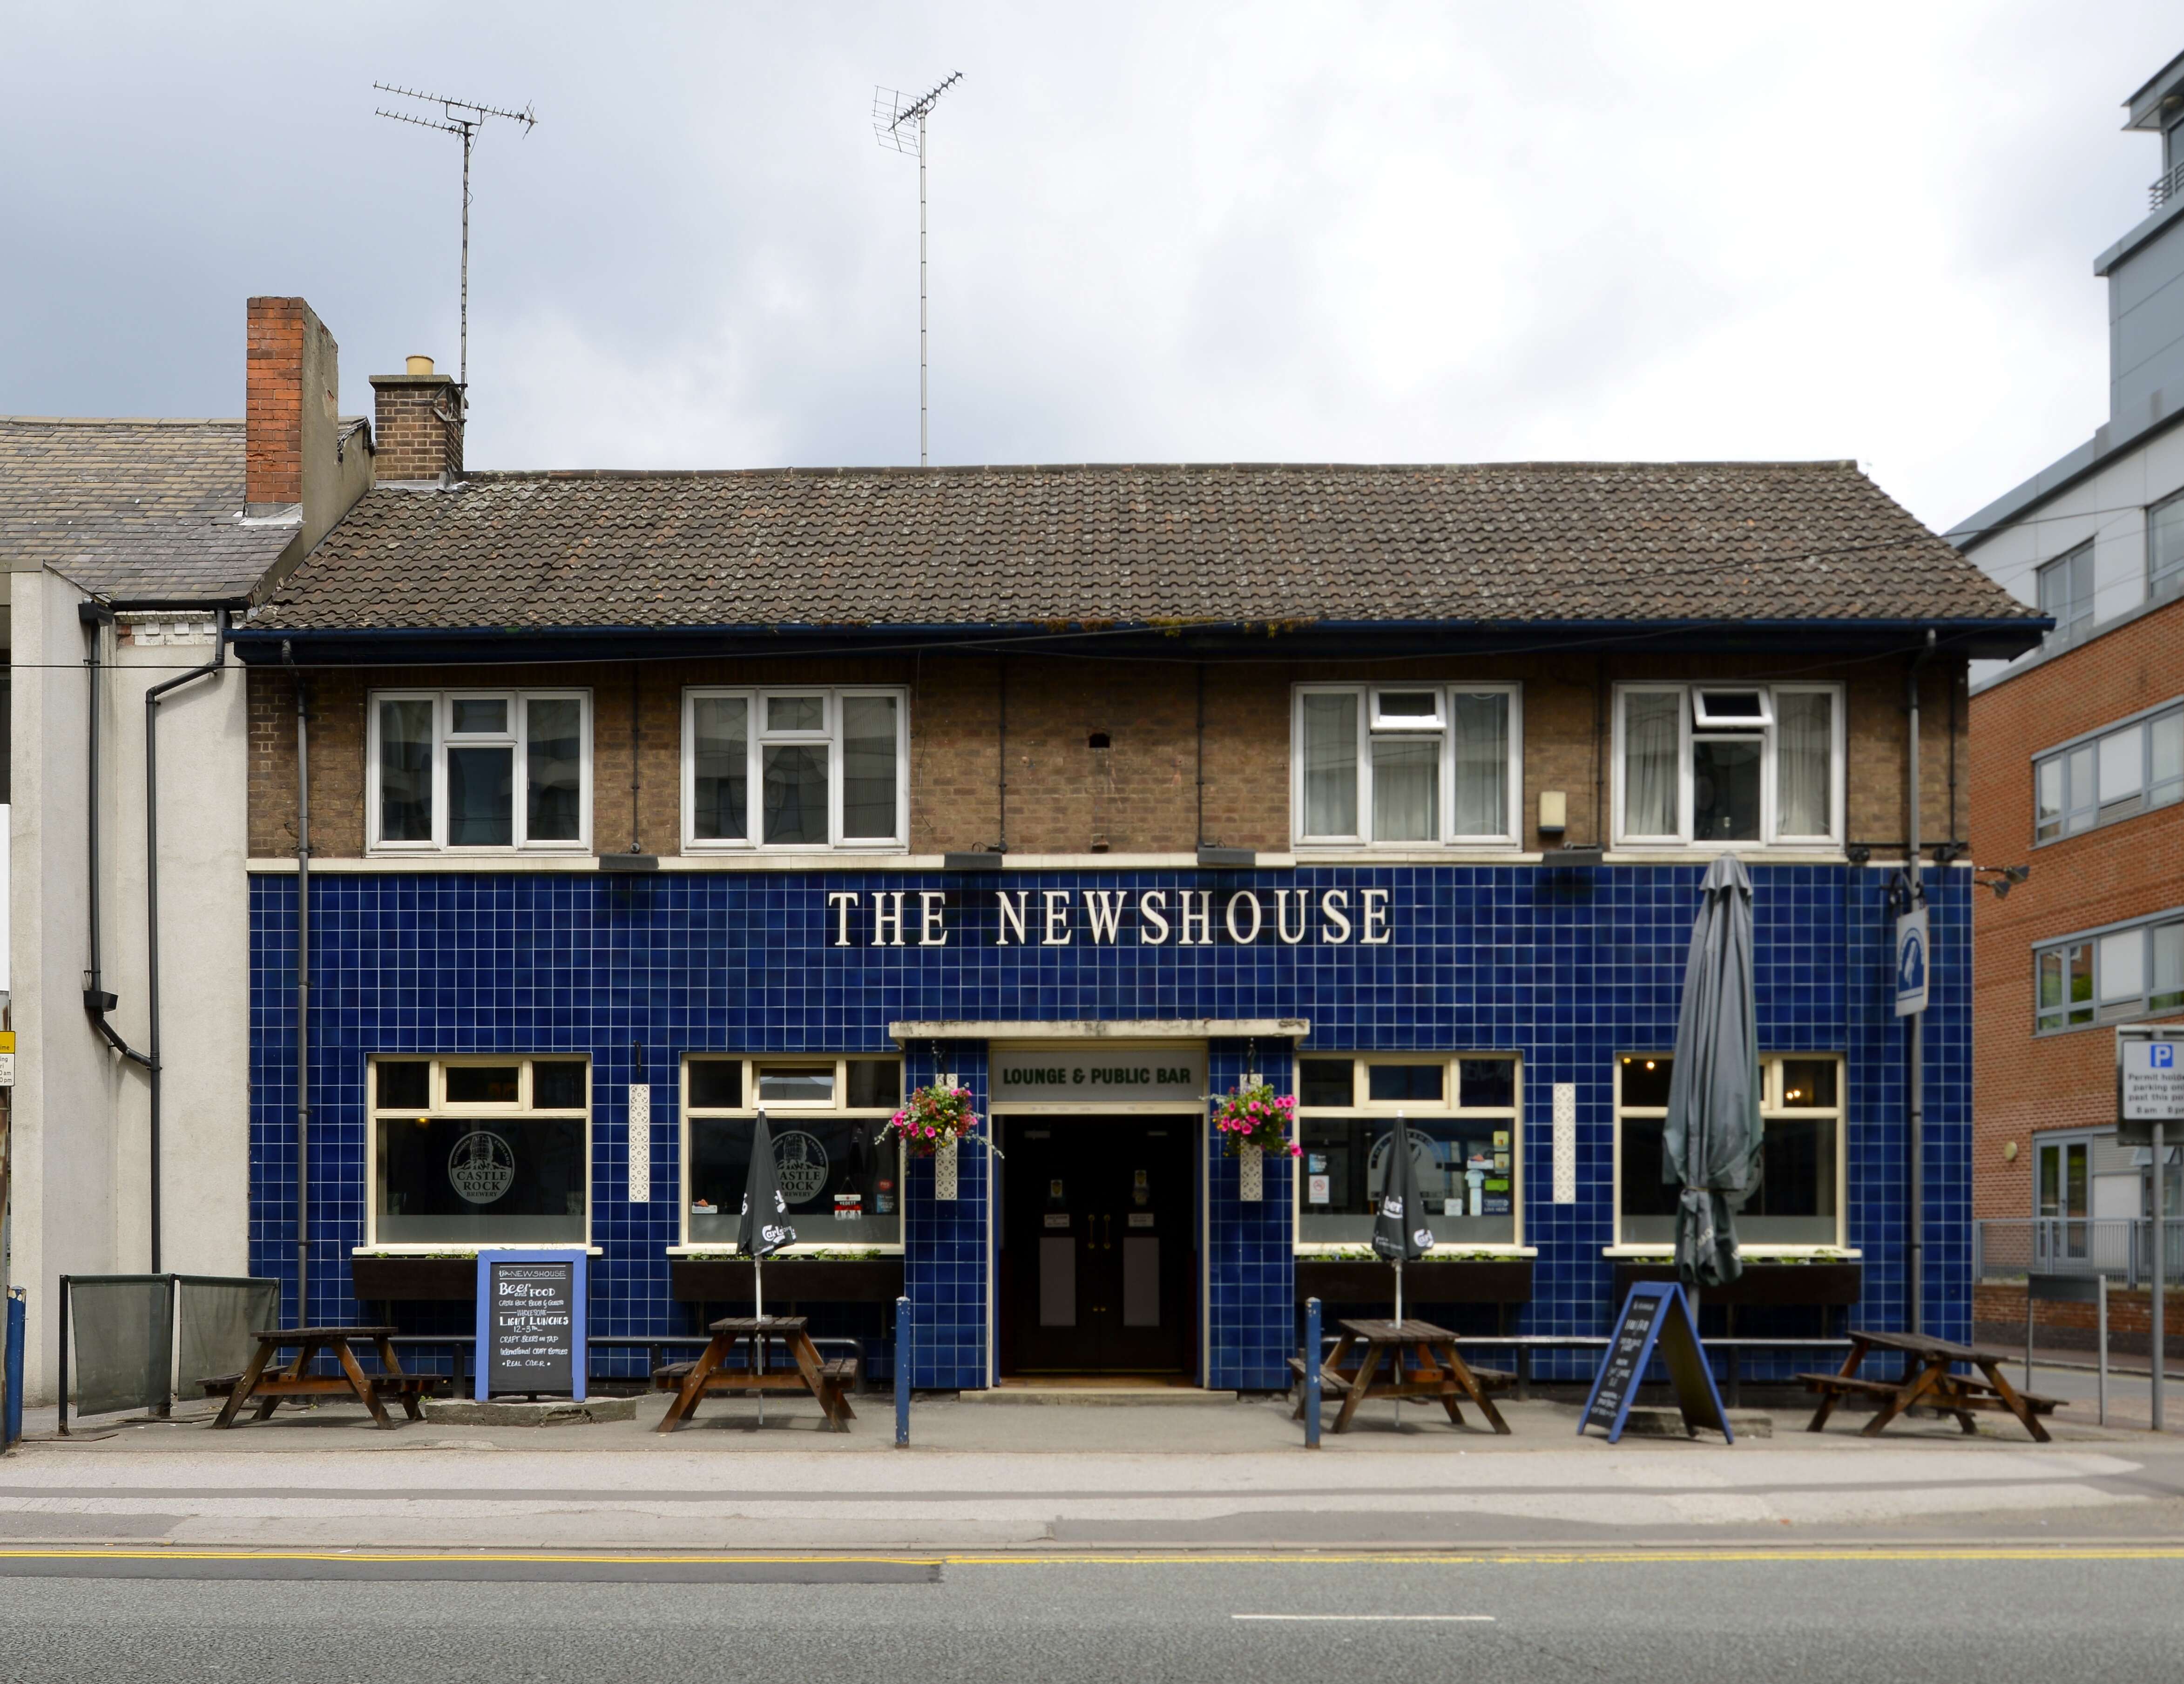 Image of Newshouse pub, Canal Street, Nottingham. Probably built or rebuilt in the early 1960s